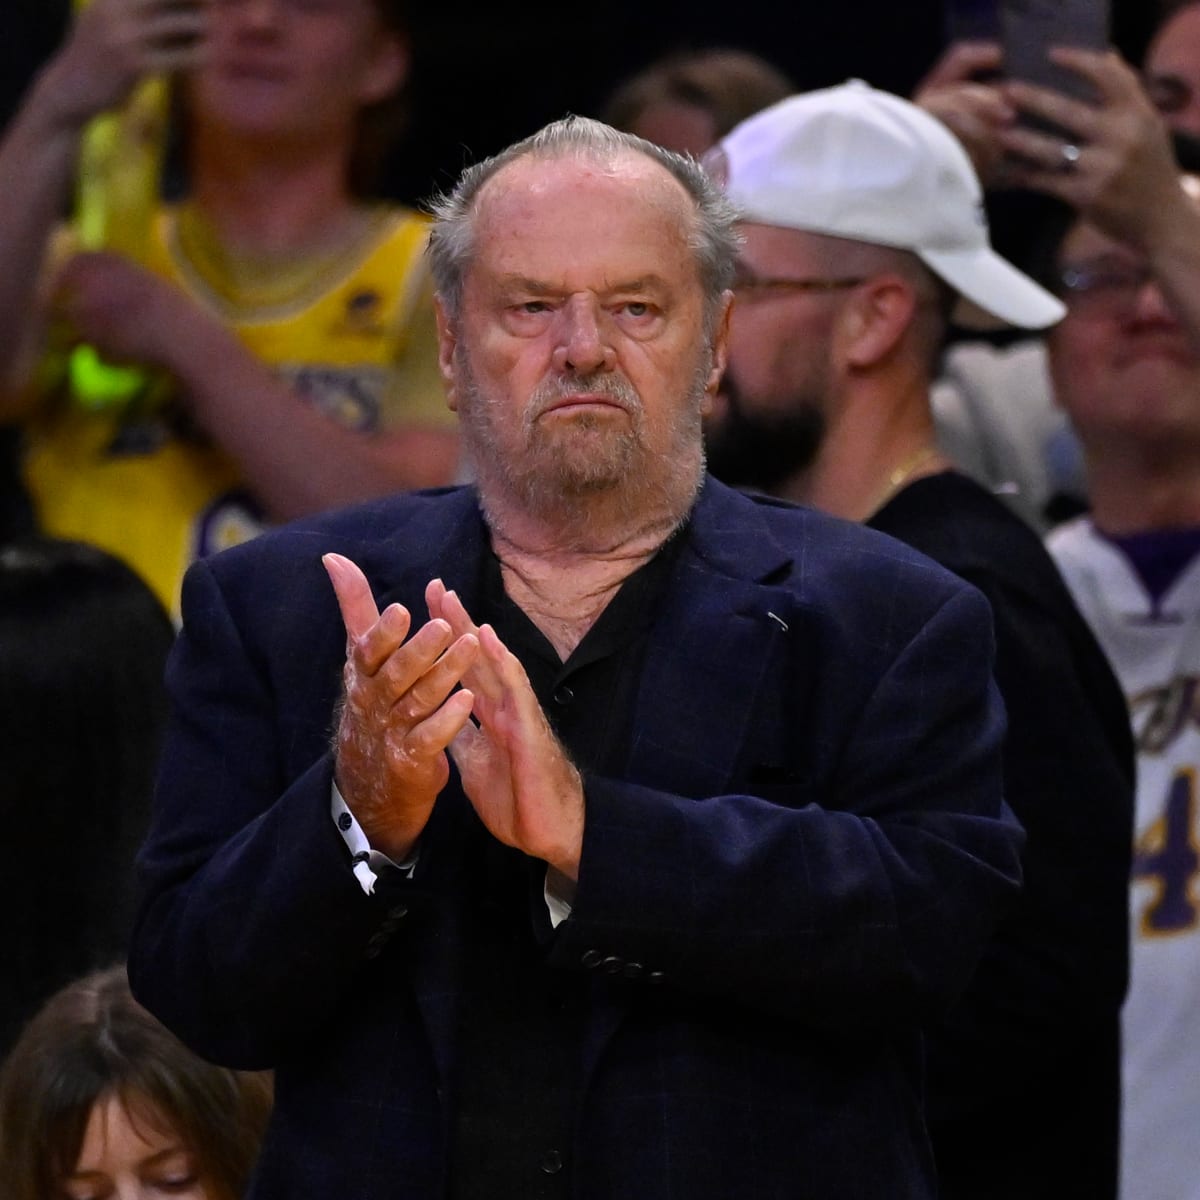 Jack Is Back' At Lakers Games - As In NJ's Own Jack Nicholson